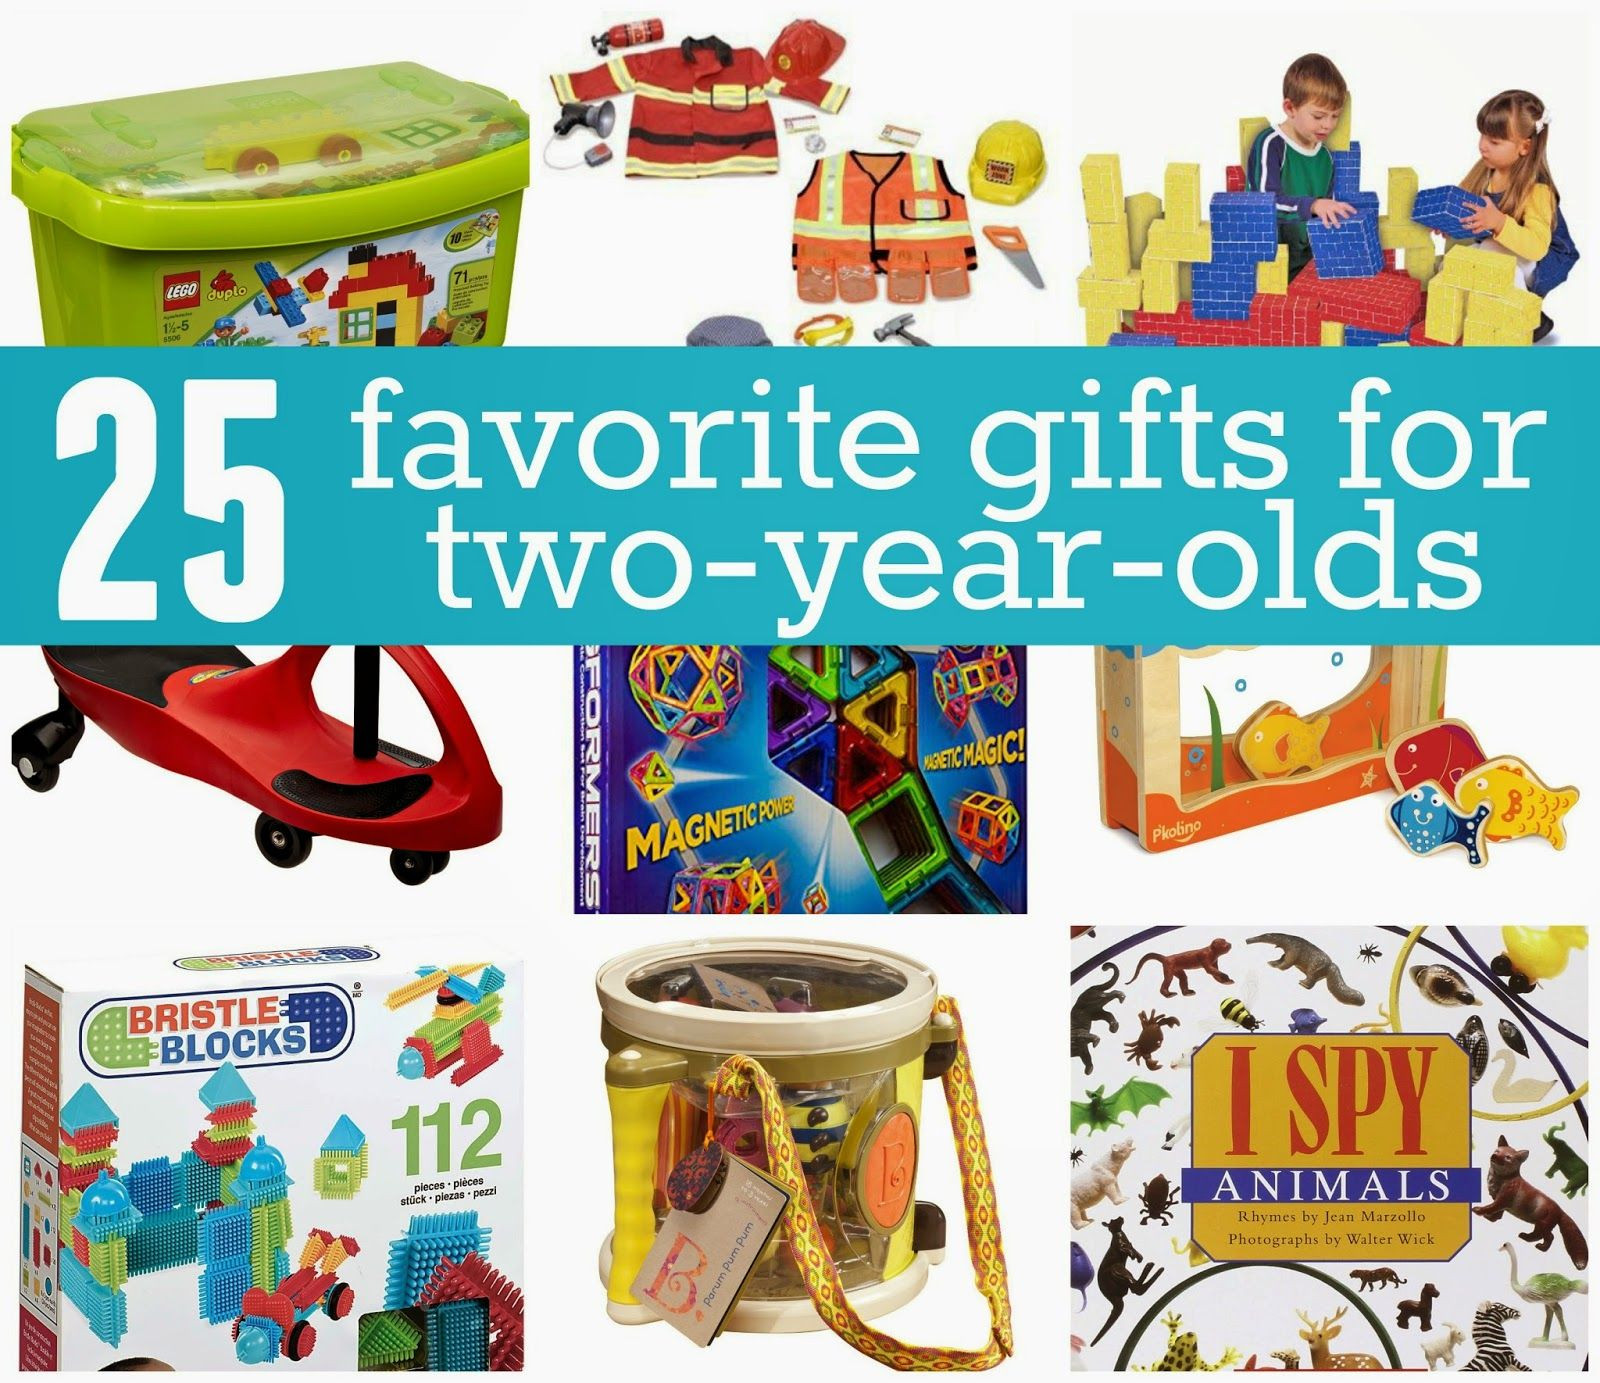 Gift Ideas For Two Year Old Boys
 Favorite Gifts for 2 Year Olds